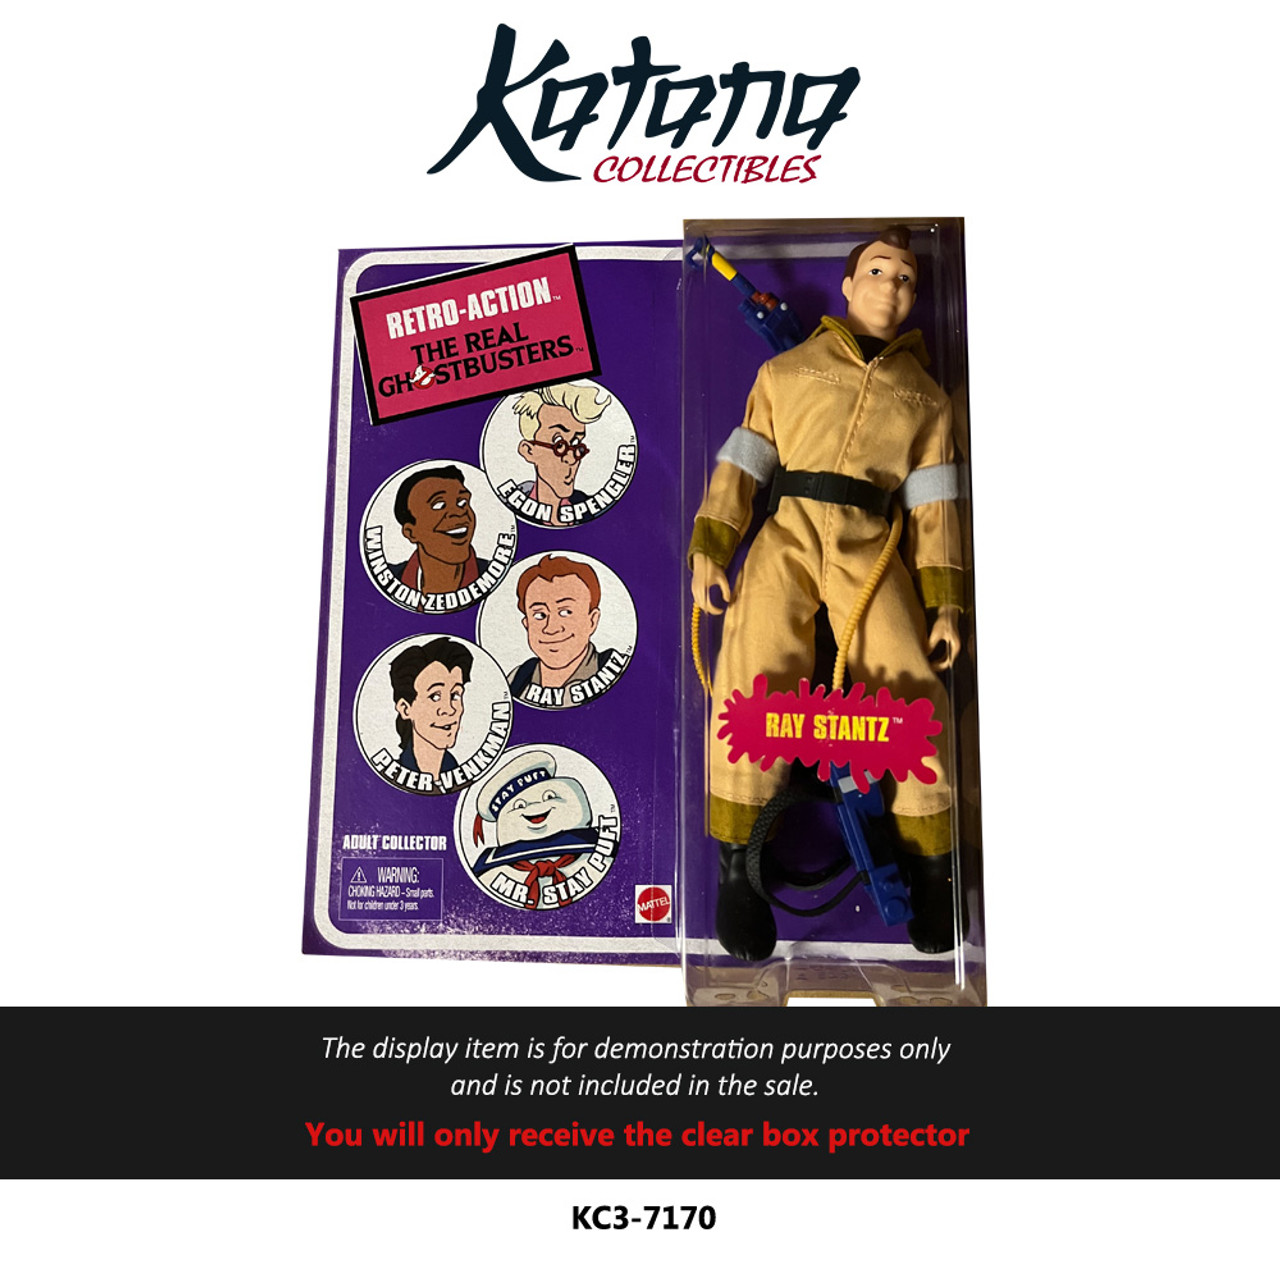 Katana Collectibles Protector For The Real GhostBusters Retro-Action Figures